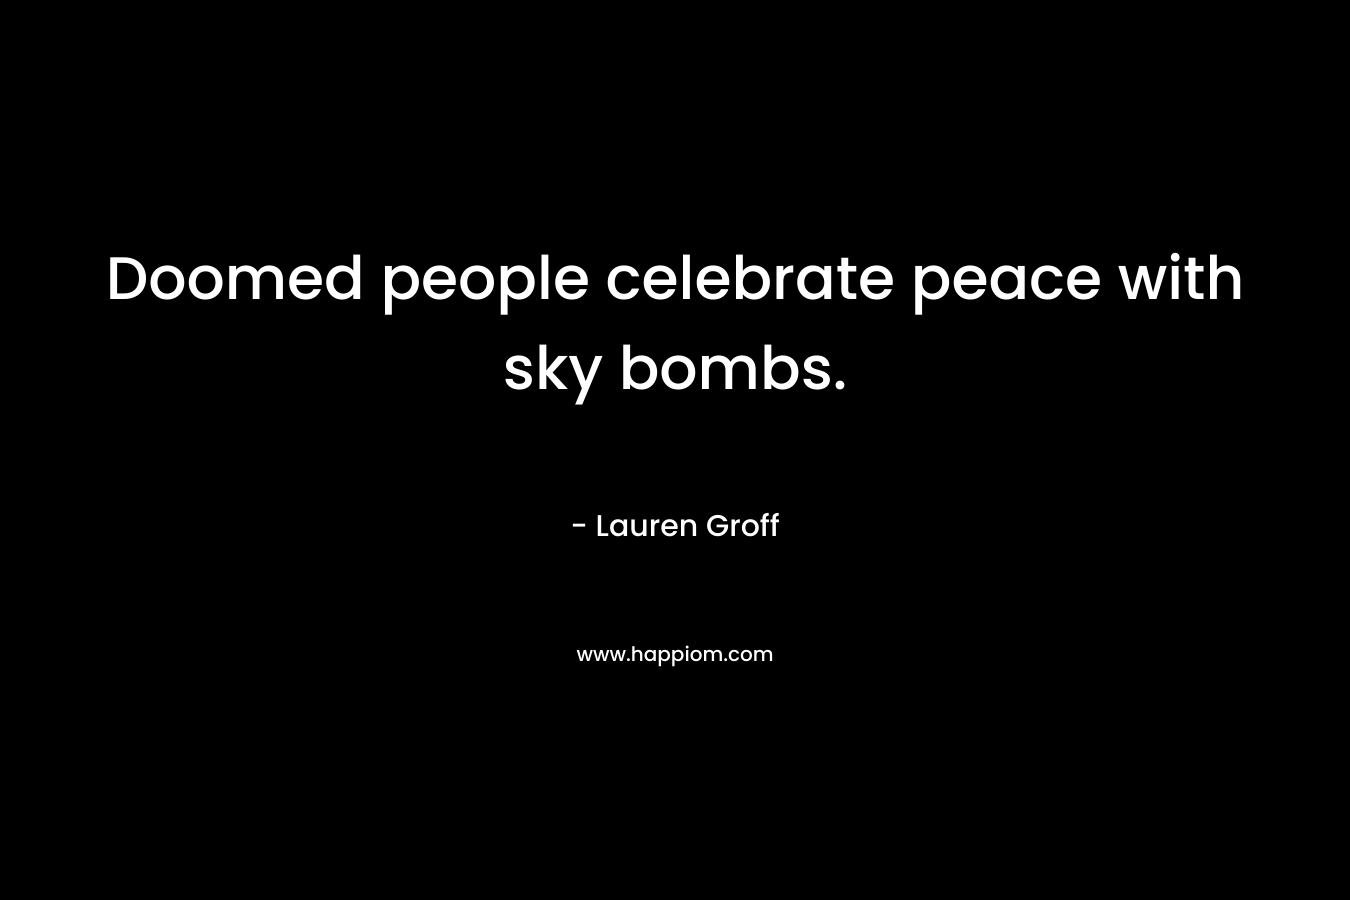 Doomed people celebrate peace with sky bombs.